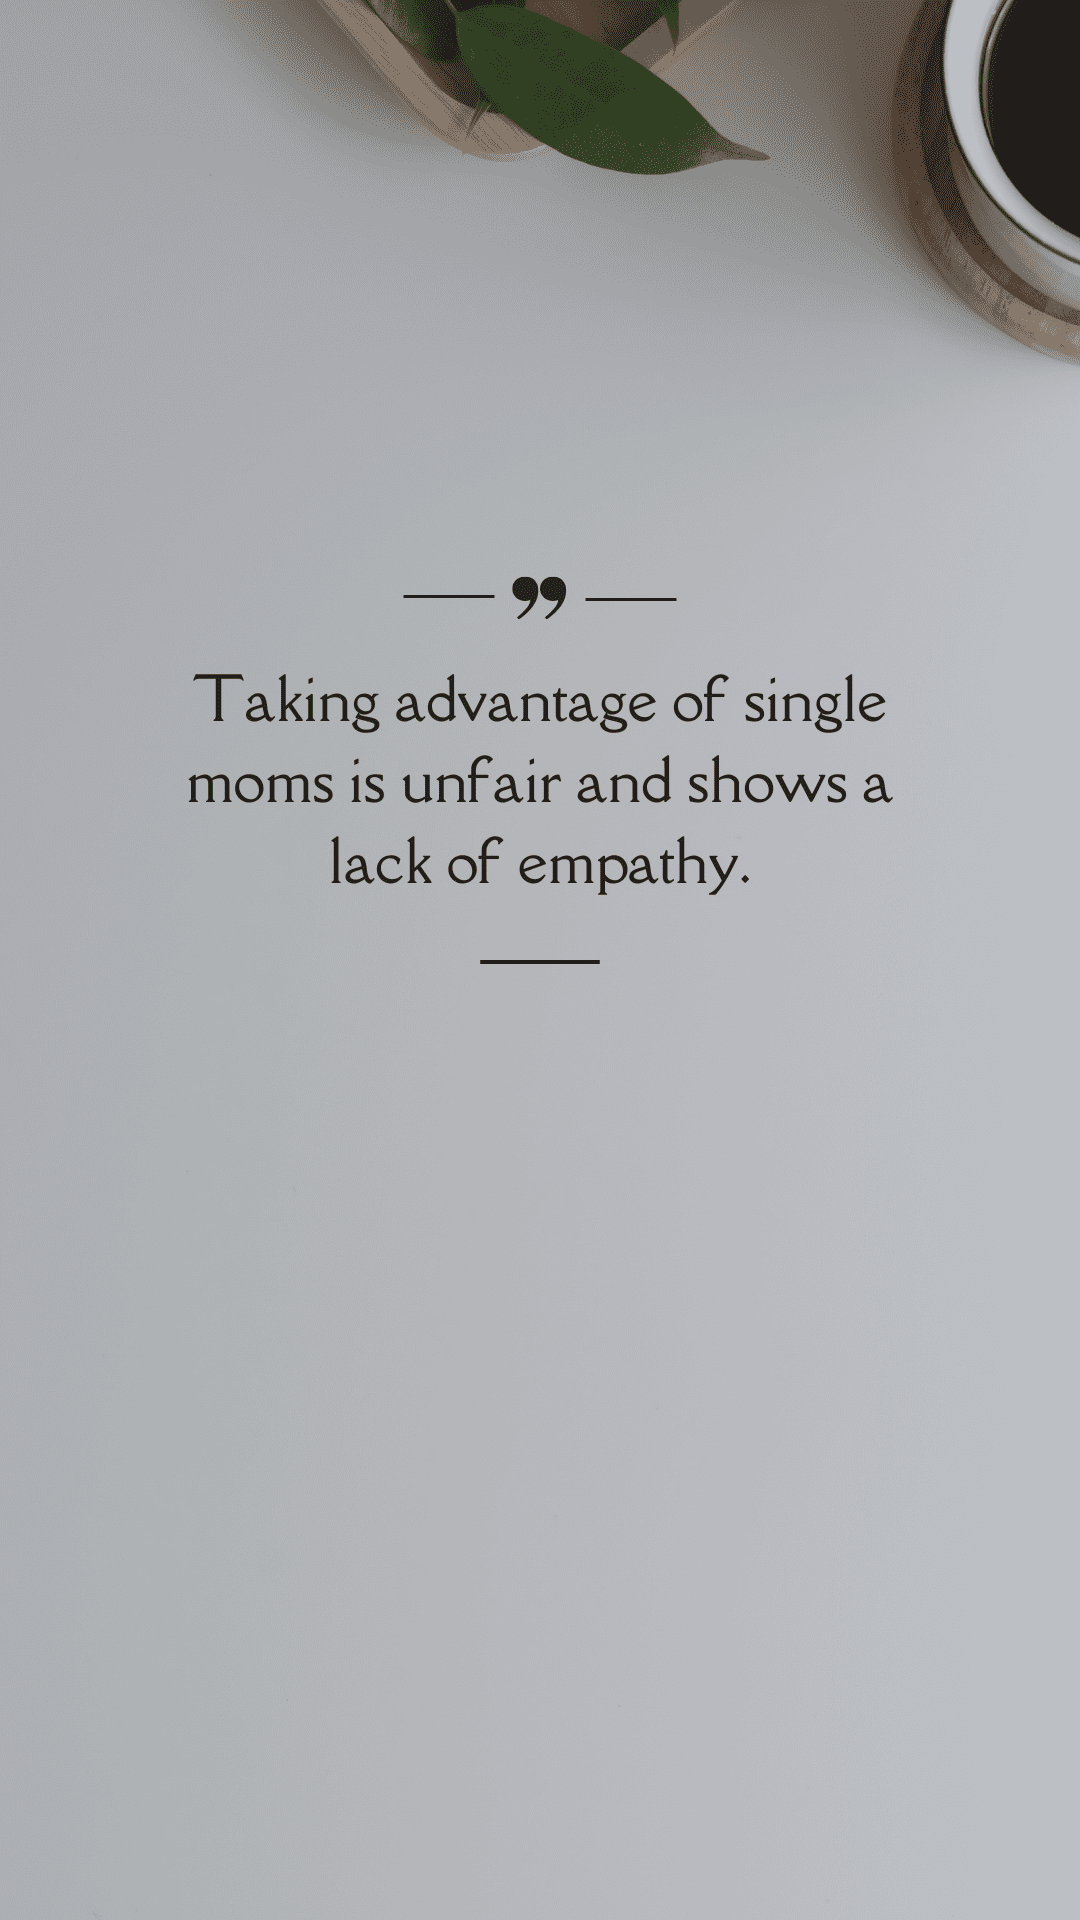 Taking advantage of single moms is unfair and shows a lack of empathy. (Quote)